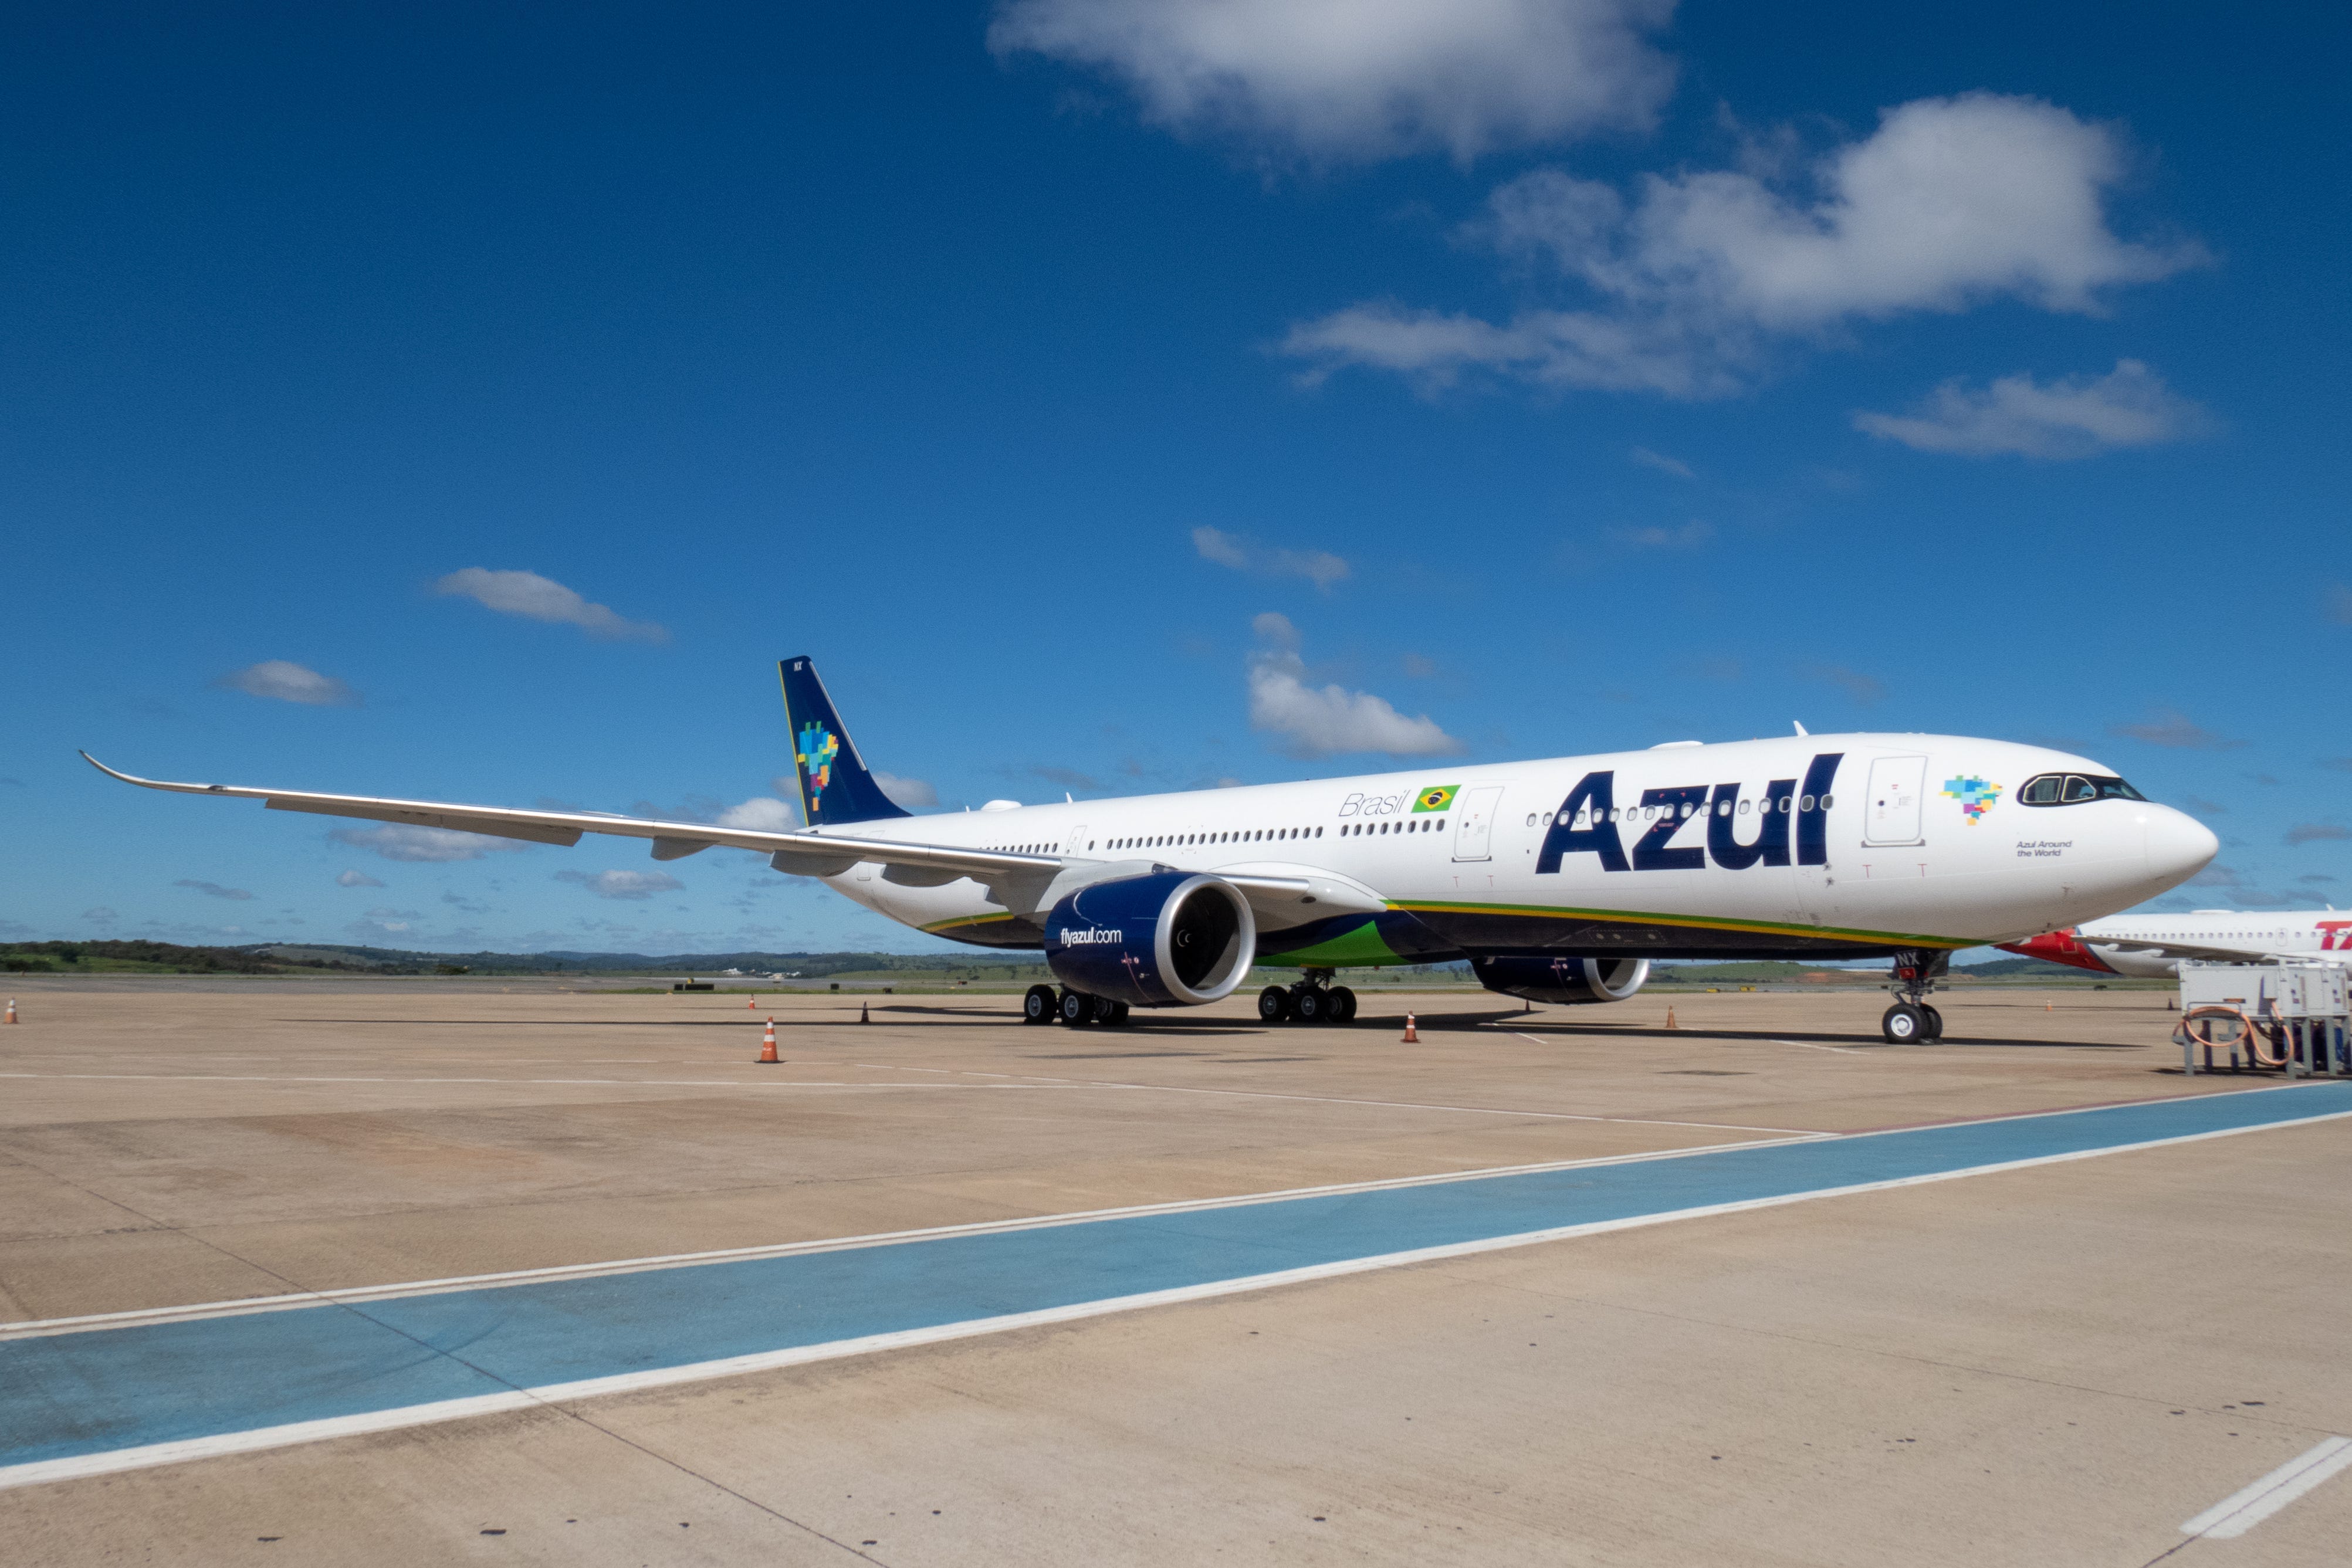 Azul Brazilian Airlines Airbus A330-900neo